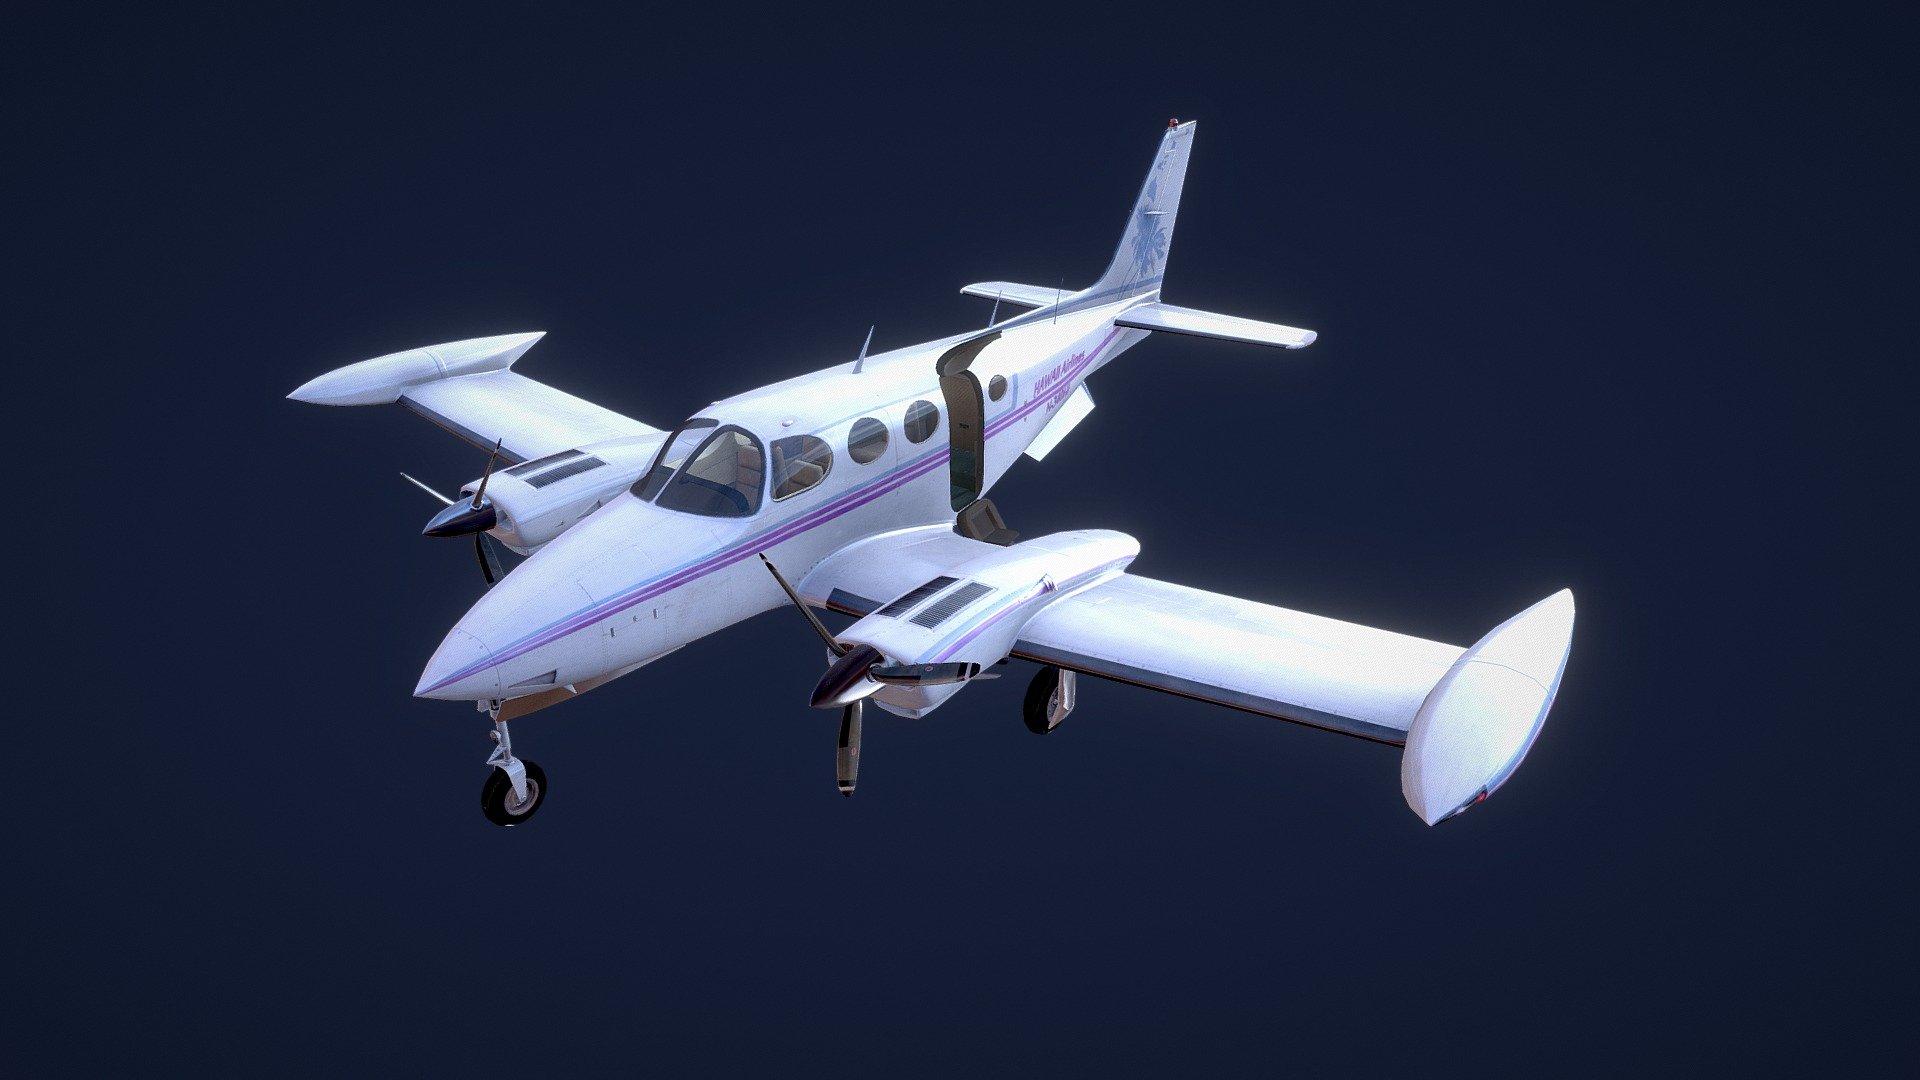 Cessna 340 Low Poly, PBR game-ready model with textures.

Modeling 3ds max, zbrush, texturing PS and Substance Painter. 
Exterior uses full set of textures: albedo, gloss, normal etc. but interior was restricted to diffuse map only 3d model